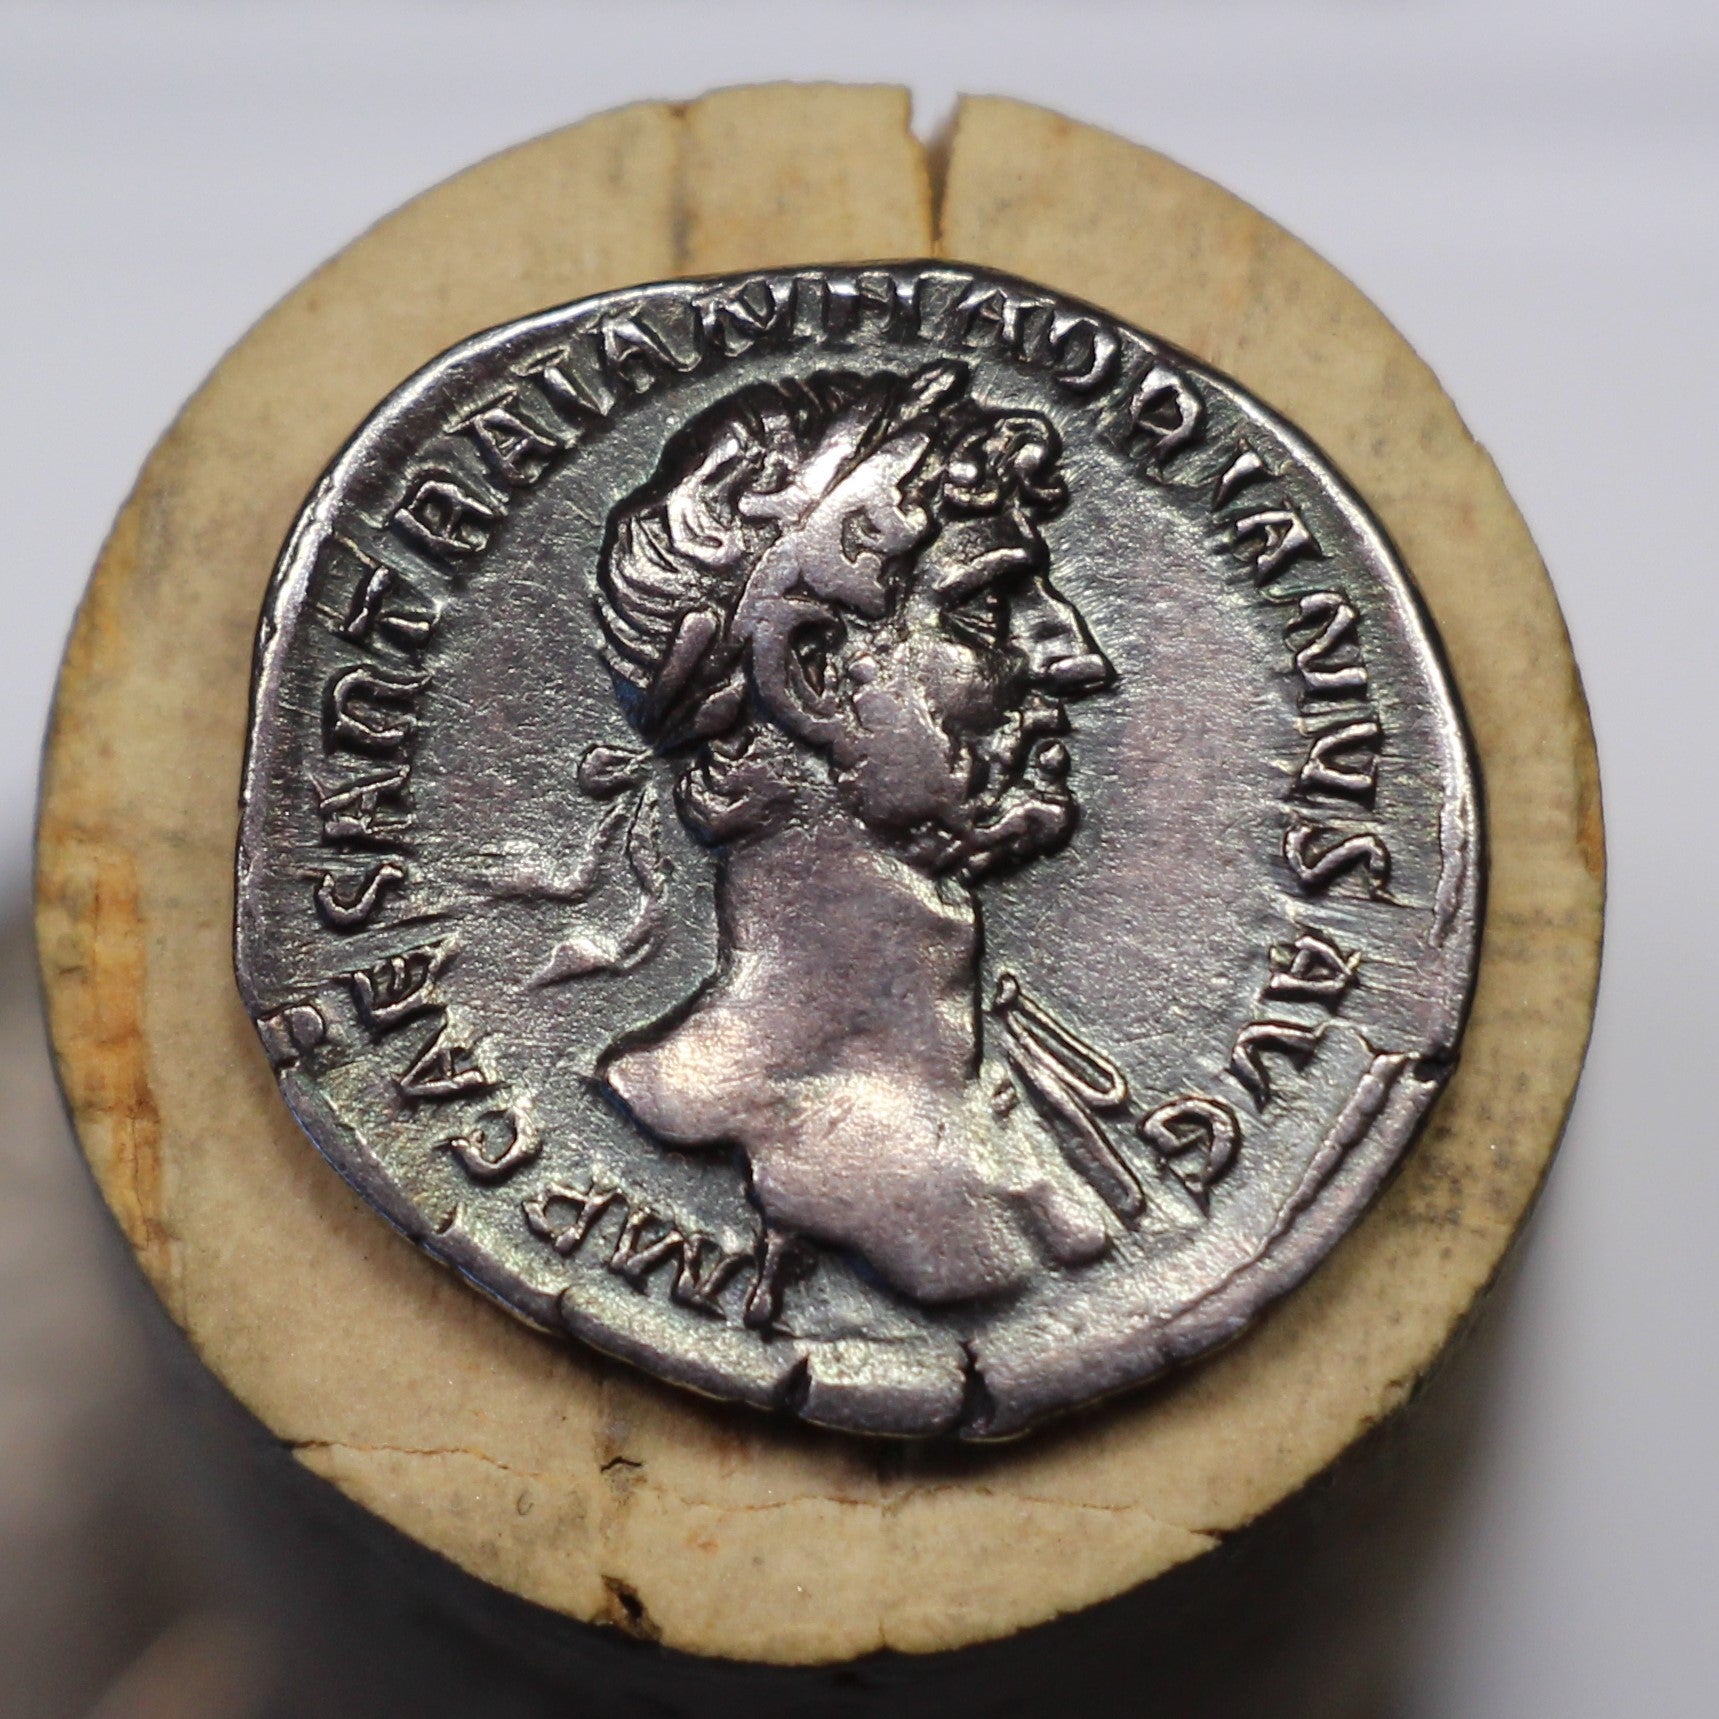 Roman Coins (Buy Ancient Roman Coins) Roman Coins for Sale |